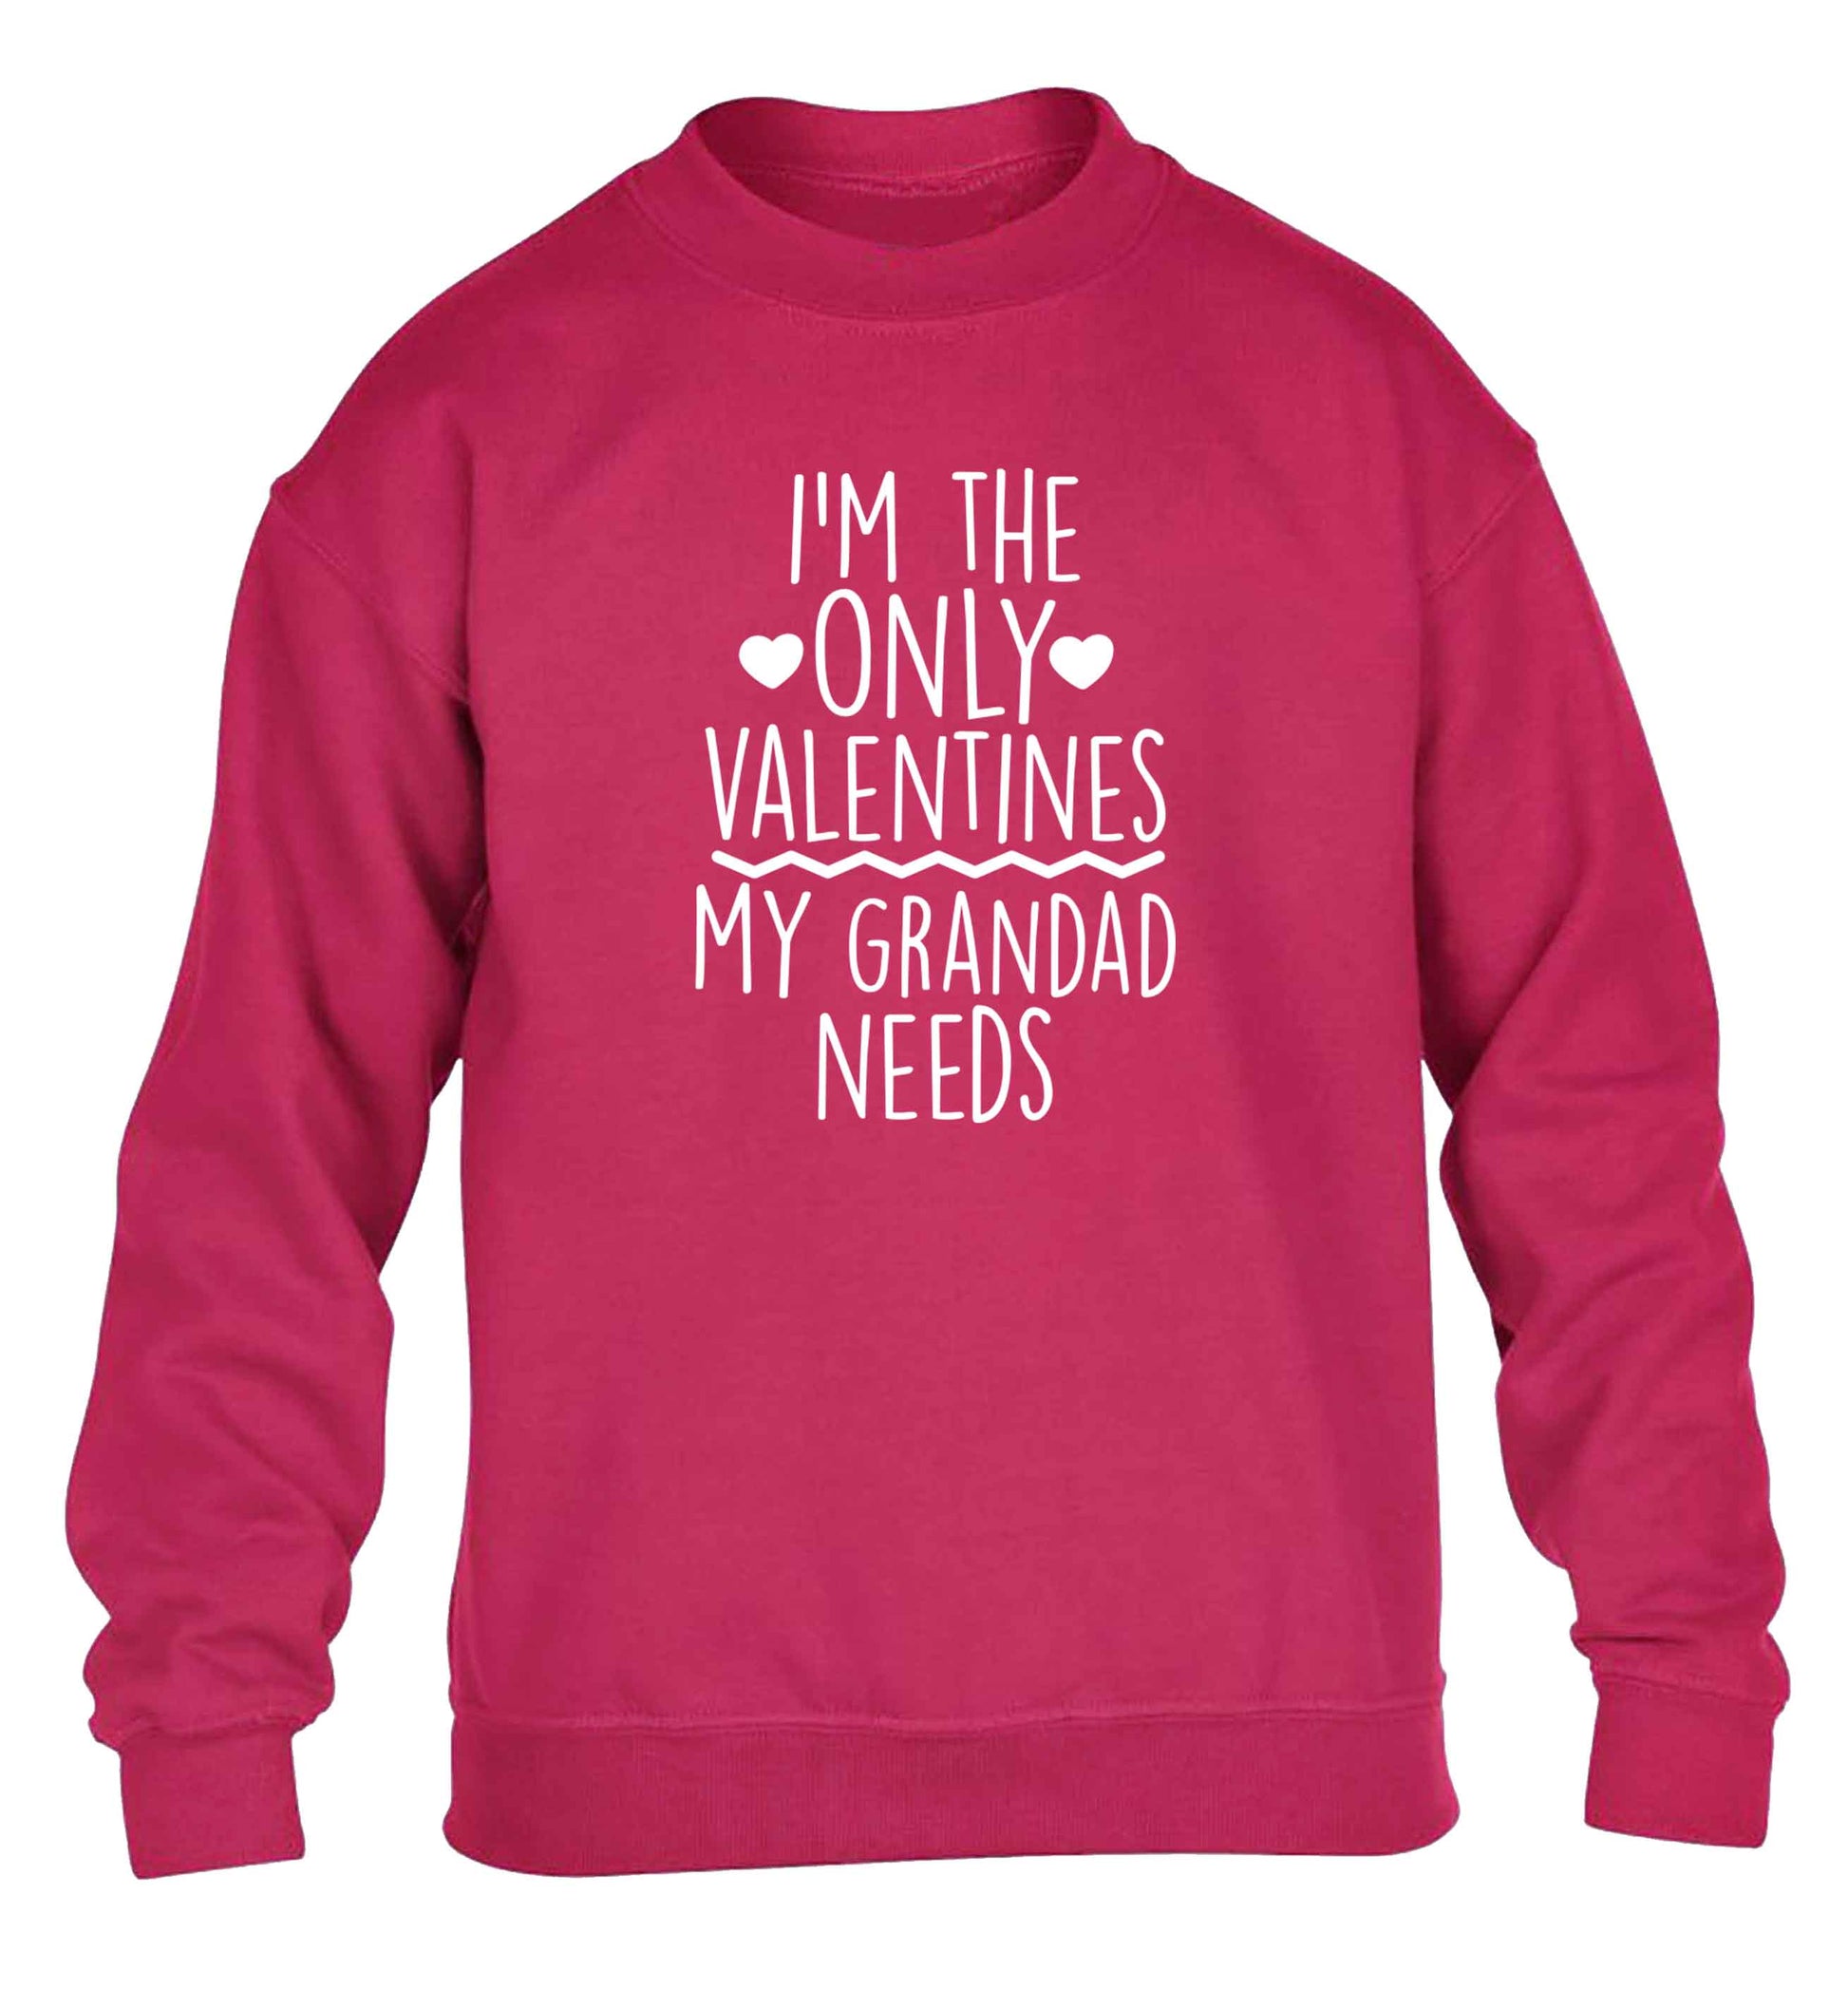 I'm the only valentines my grandad needs children's pink sweater 12-13 Years